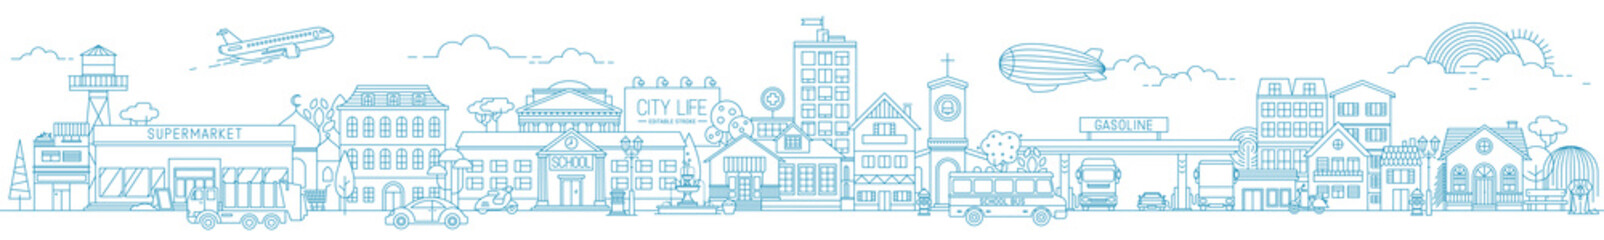 Monochrome horizontal urban landscape with city or town street or district. Cityscape with living houses and shops drawn with contour lines on white background. Vector illustration in lineart style - 350571963